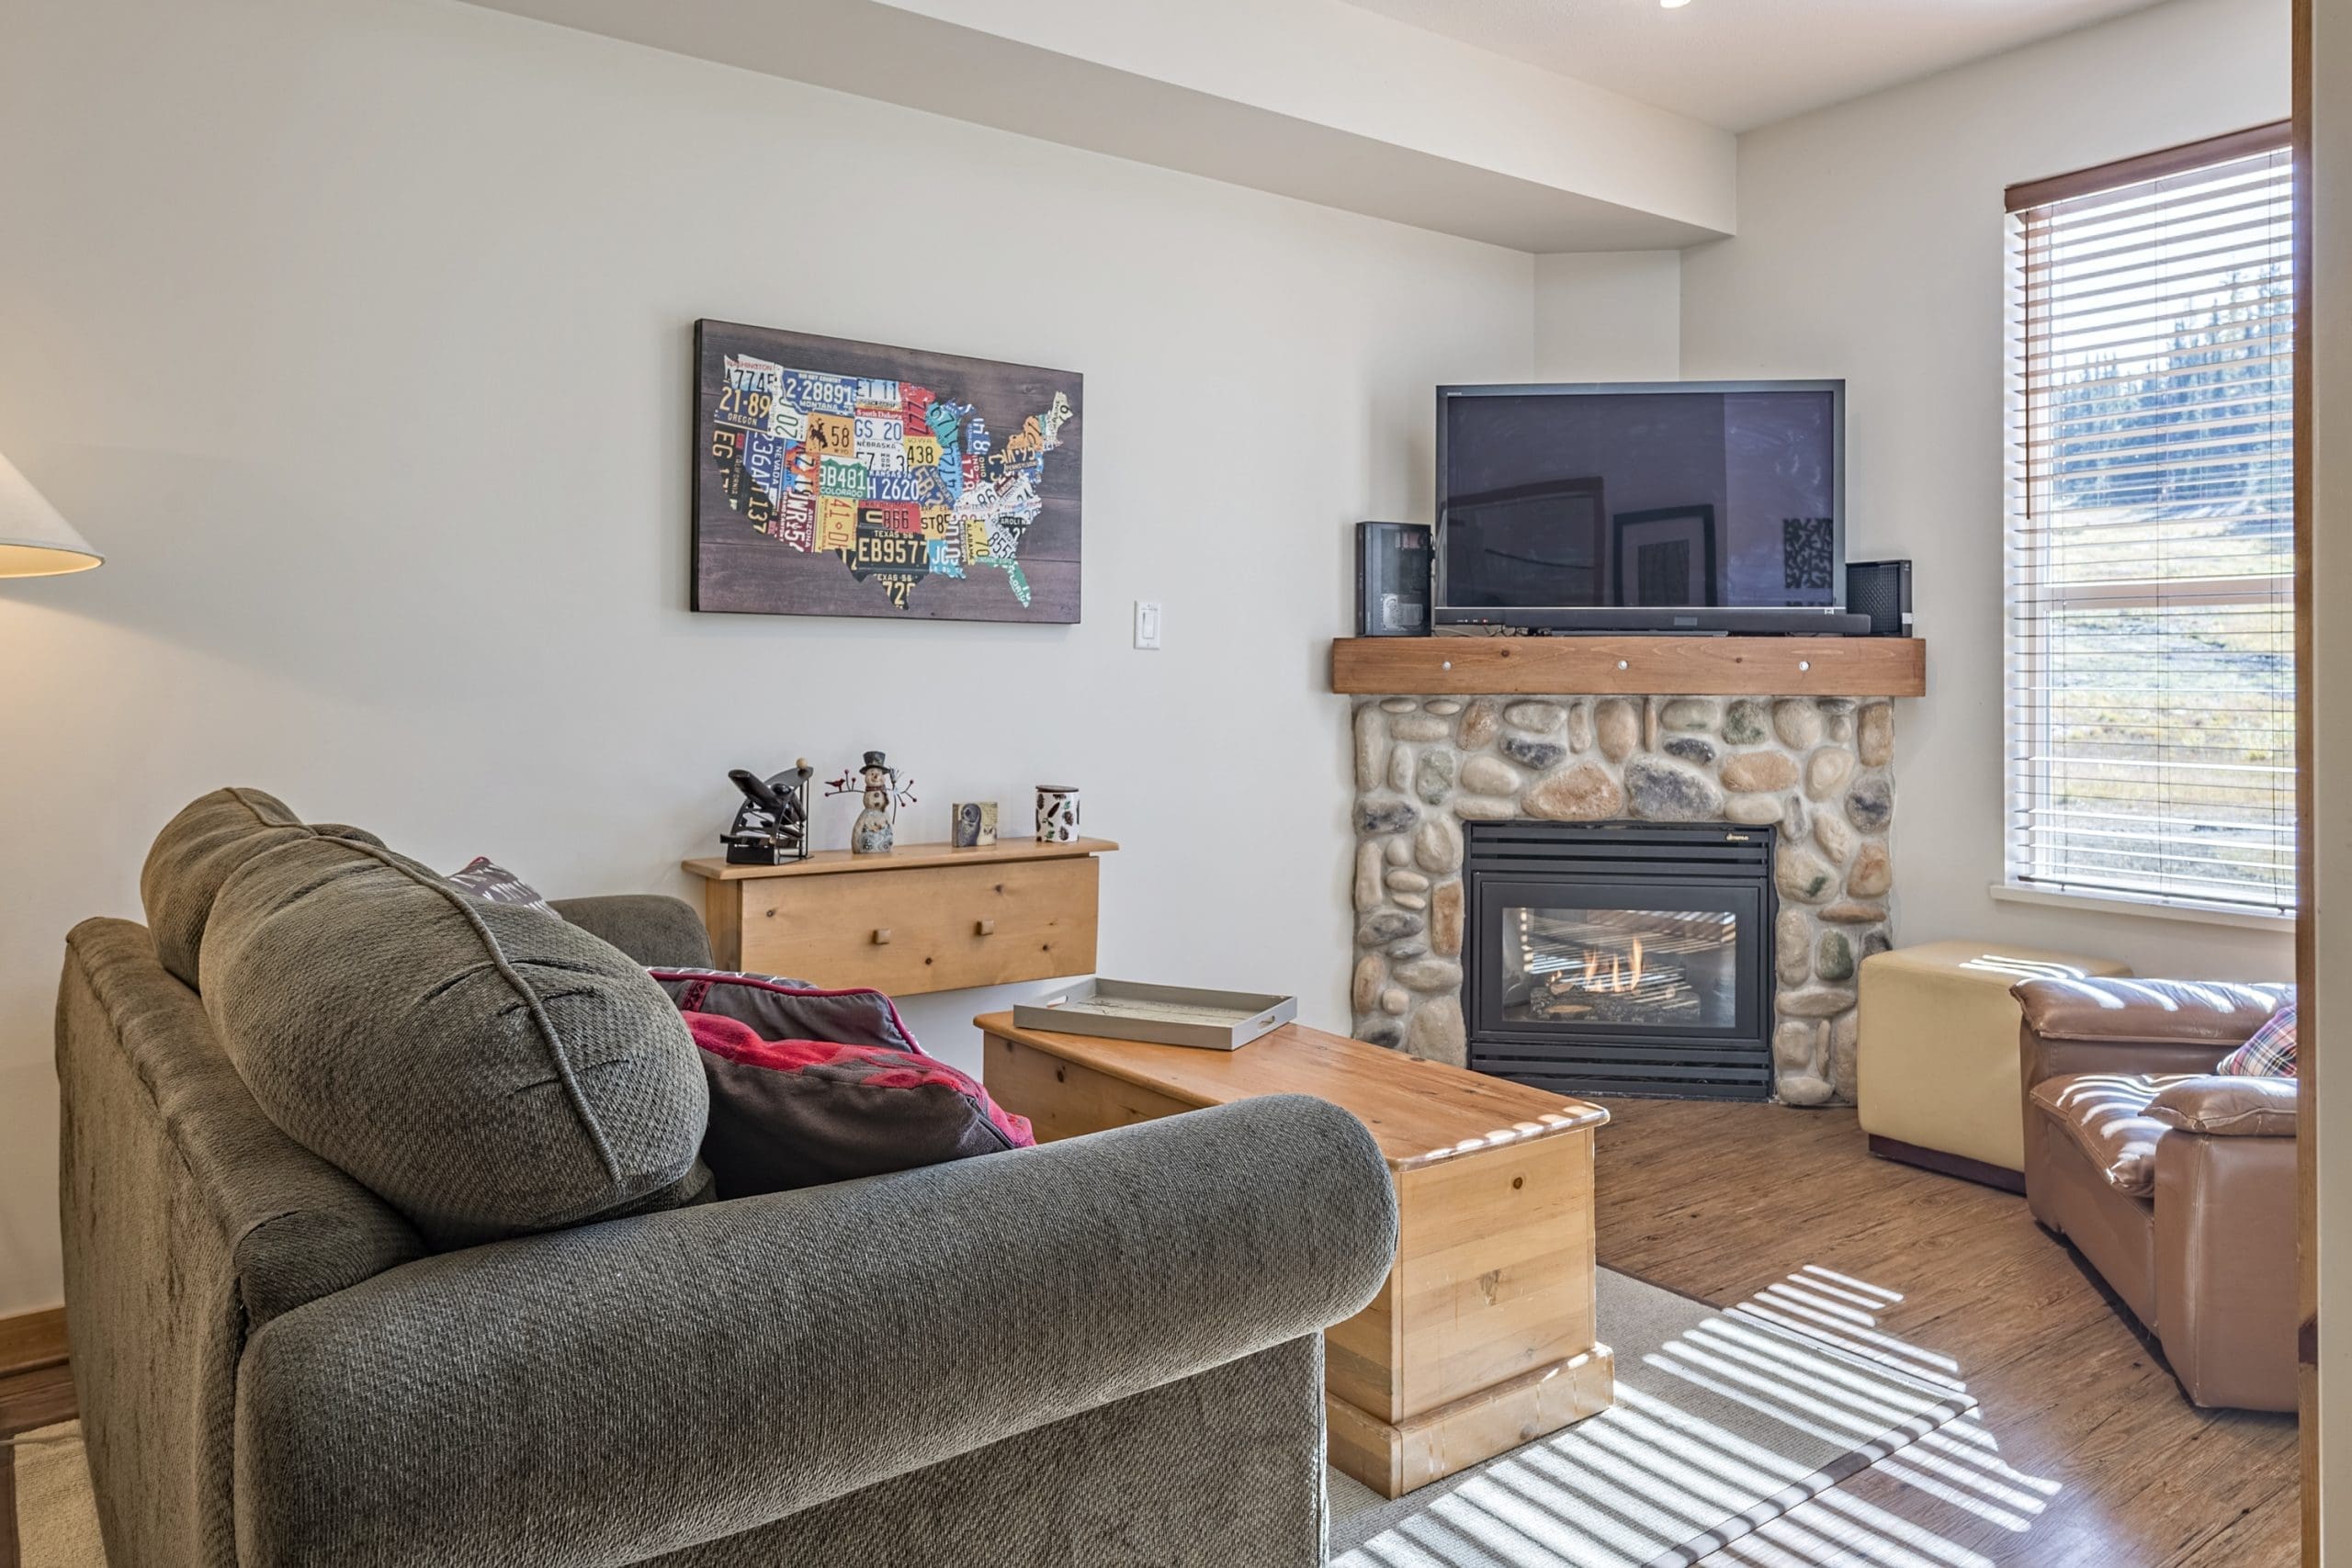 Cozy ground level condo at Creekside. Directly slopeside with gas fireplace, bright windows and pet-friendly! Ski right from your door to the base of the Silver Queen chair to start your day.